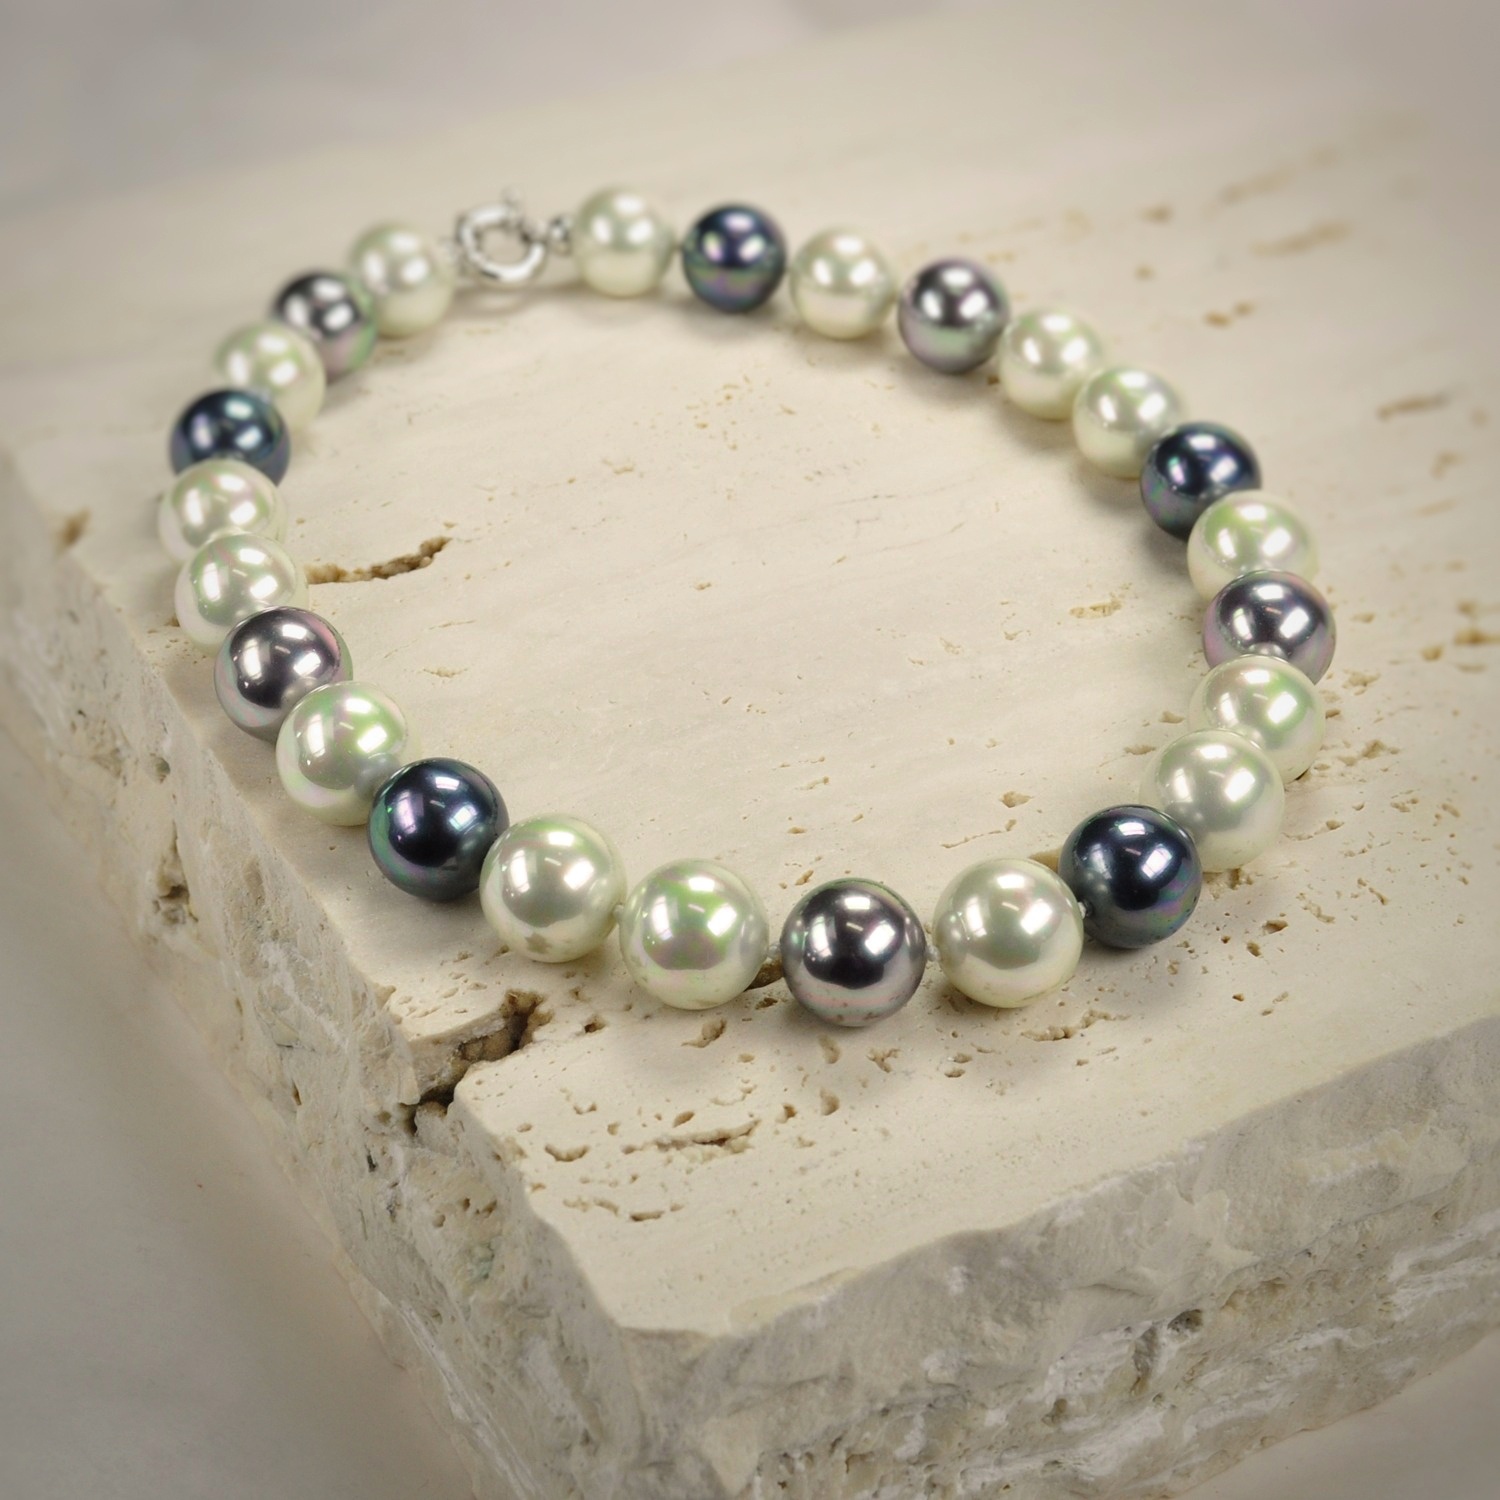 Classic white, grey and black Pearl Necklace. 1